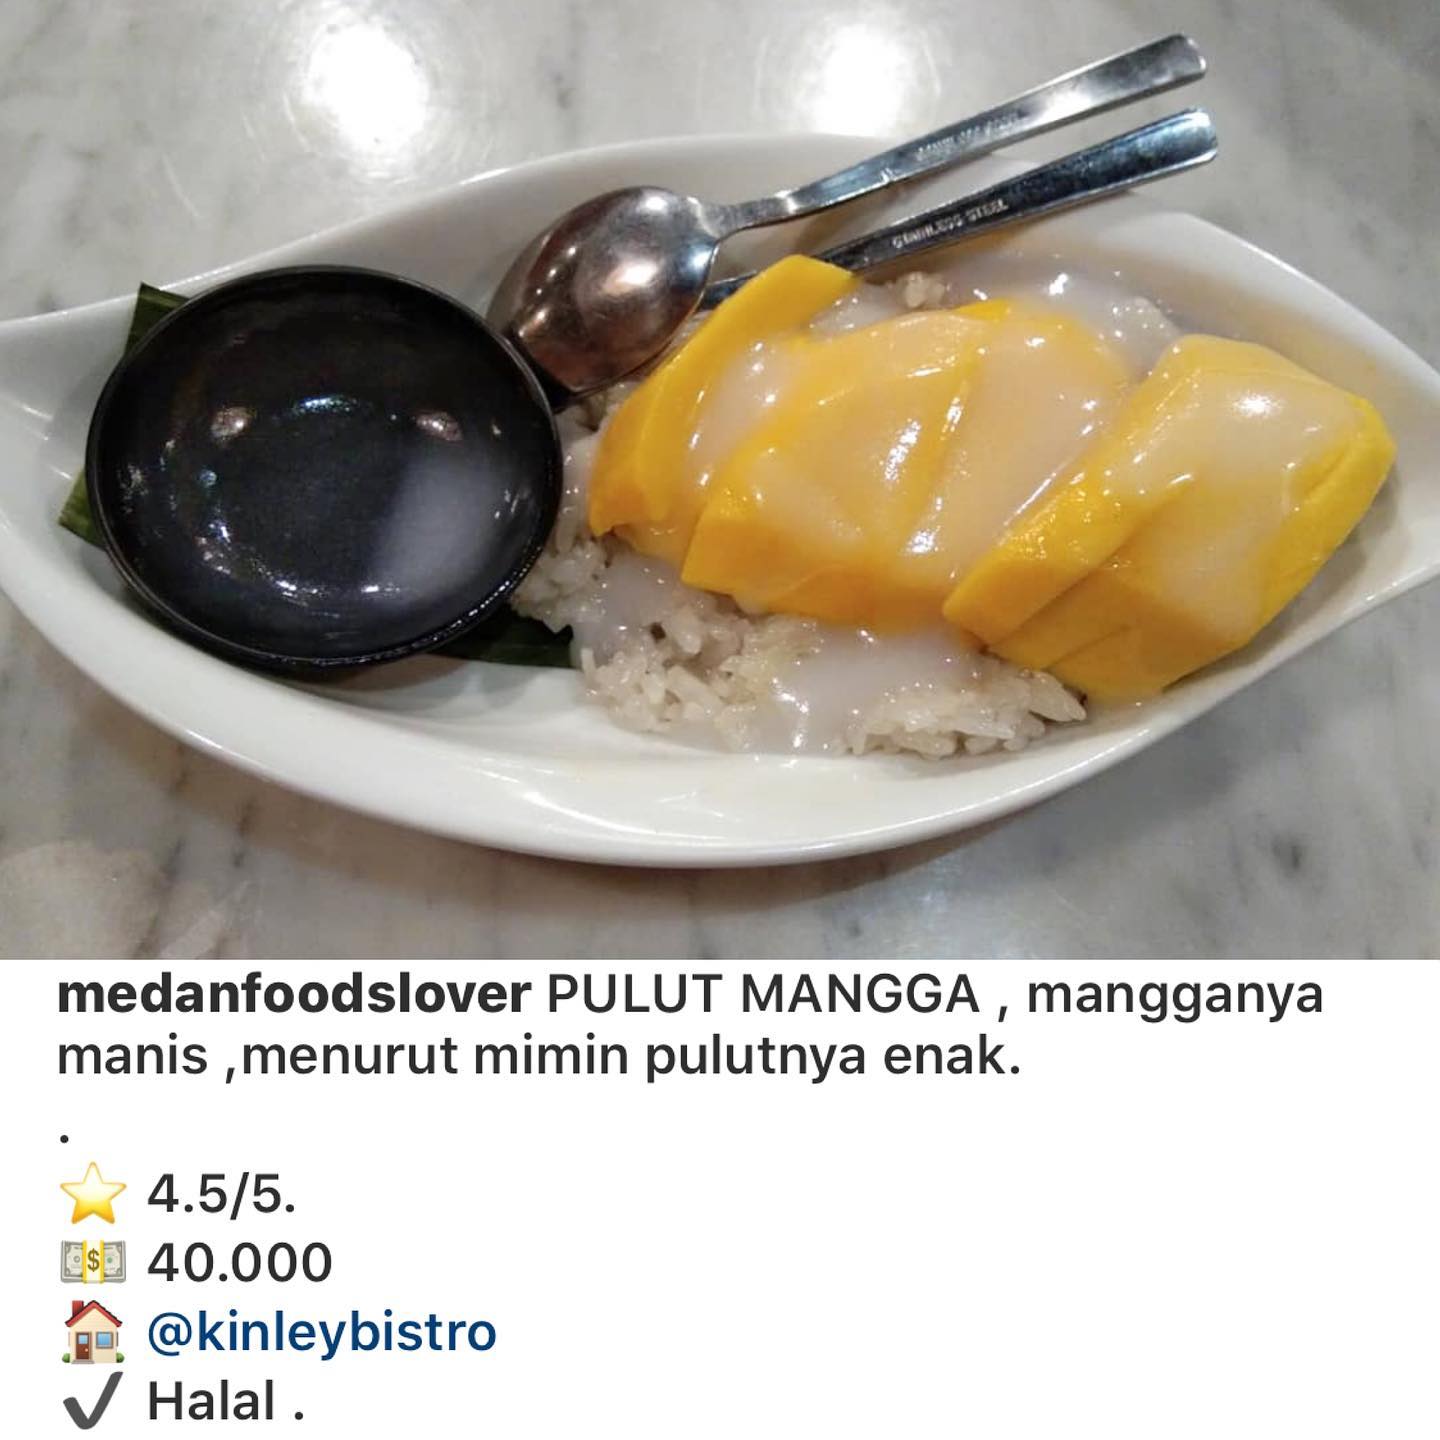 Pulut Mangga Kinley Thai Bistro
Manis dan enak!
Thank you for your kindest review and recommendation @medanfoodslover 🥰
.
Read more .